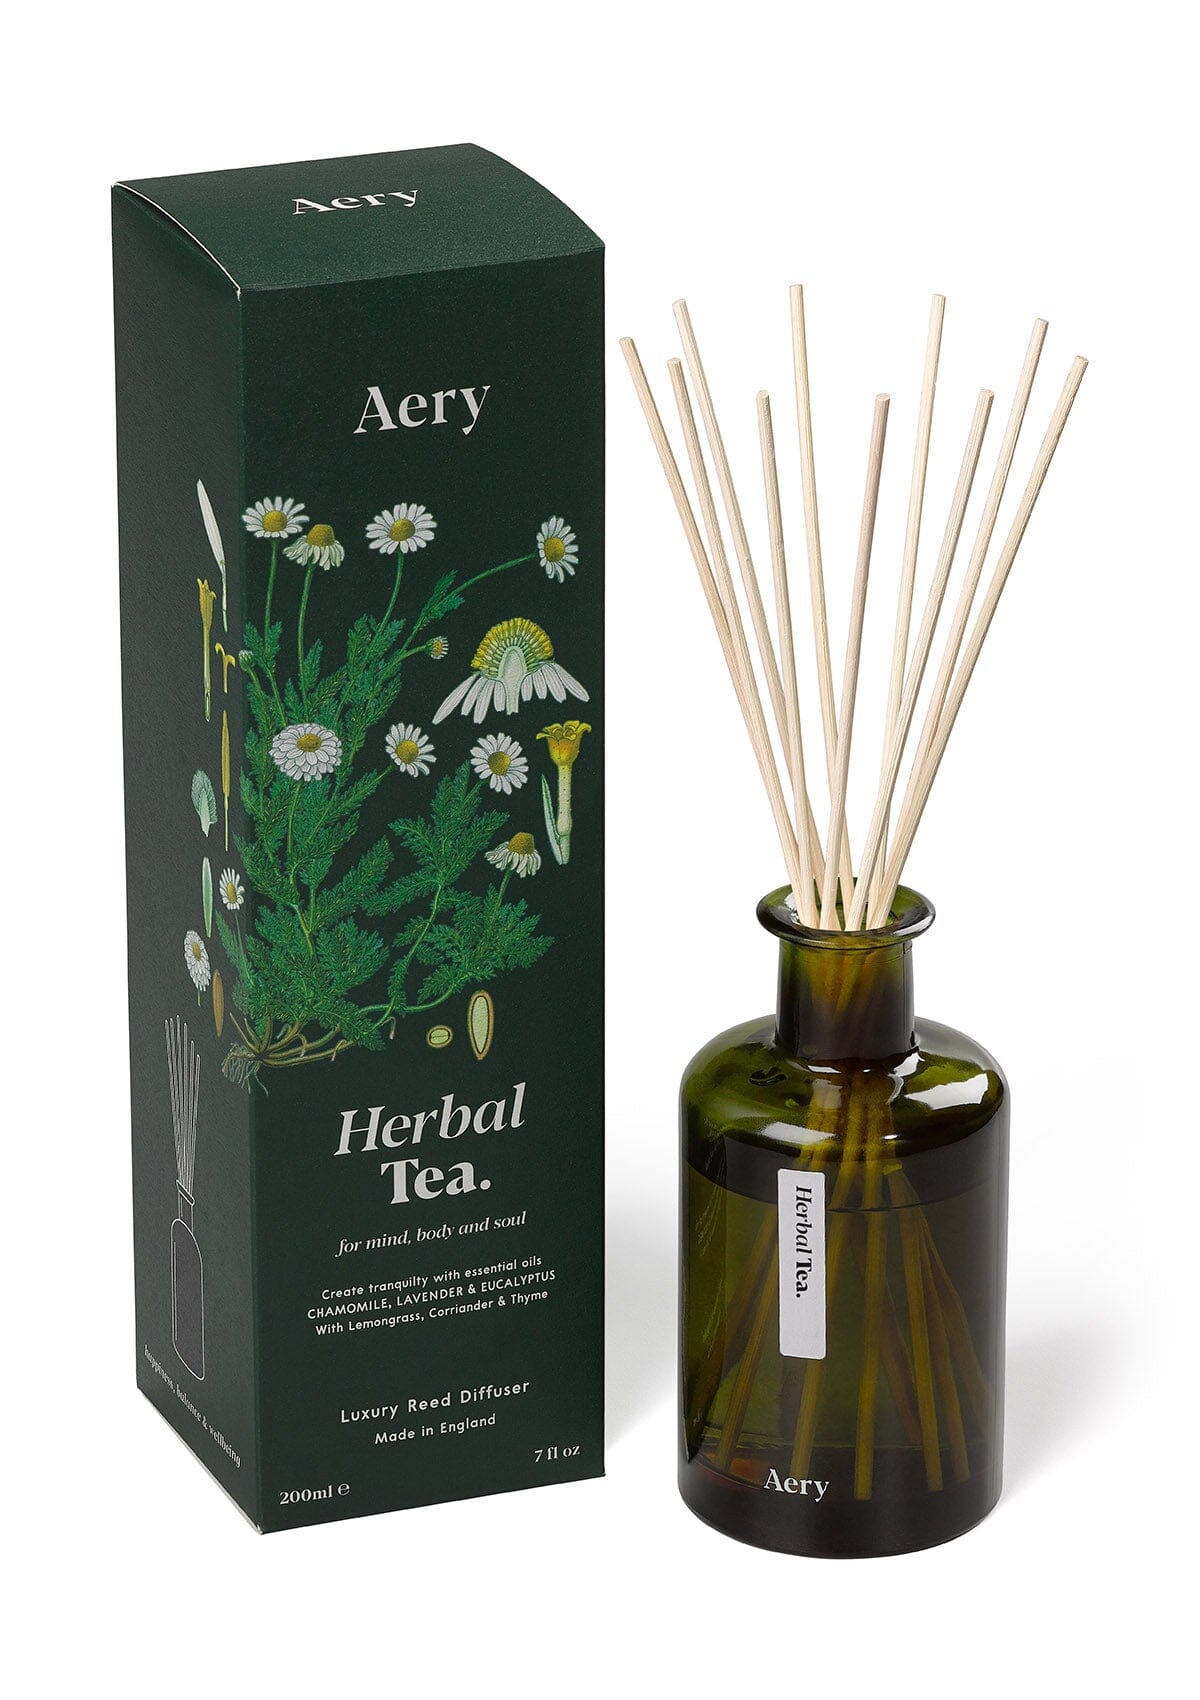 Green Herbal Tea diffuser displayed next to product packaging by Aery on white background 